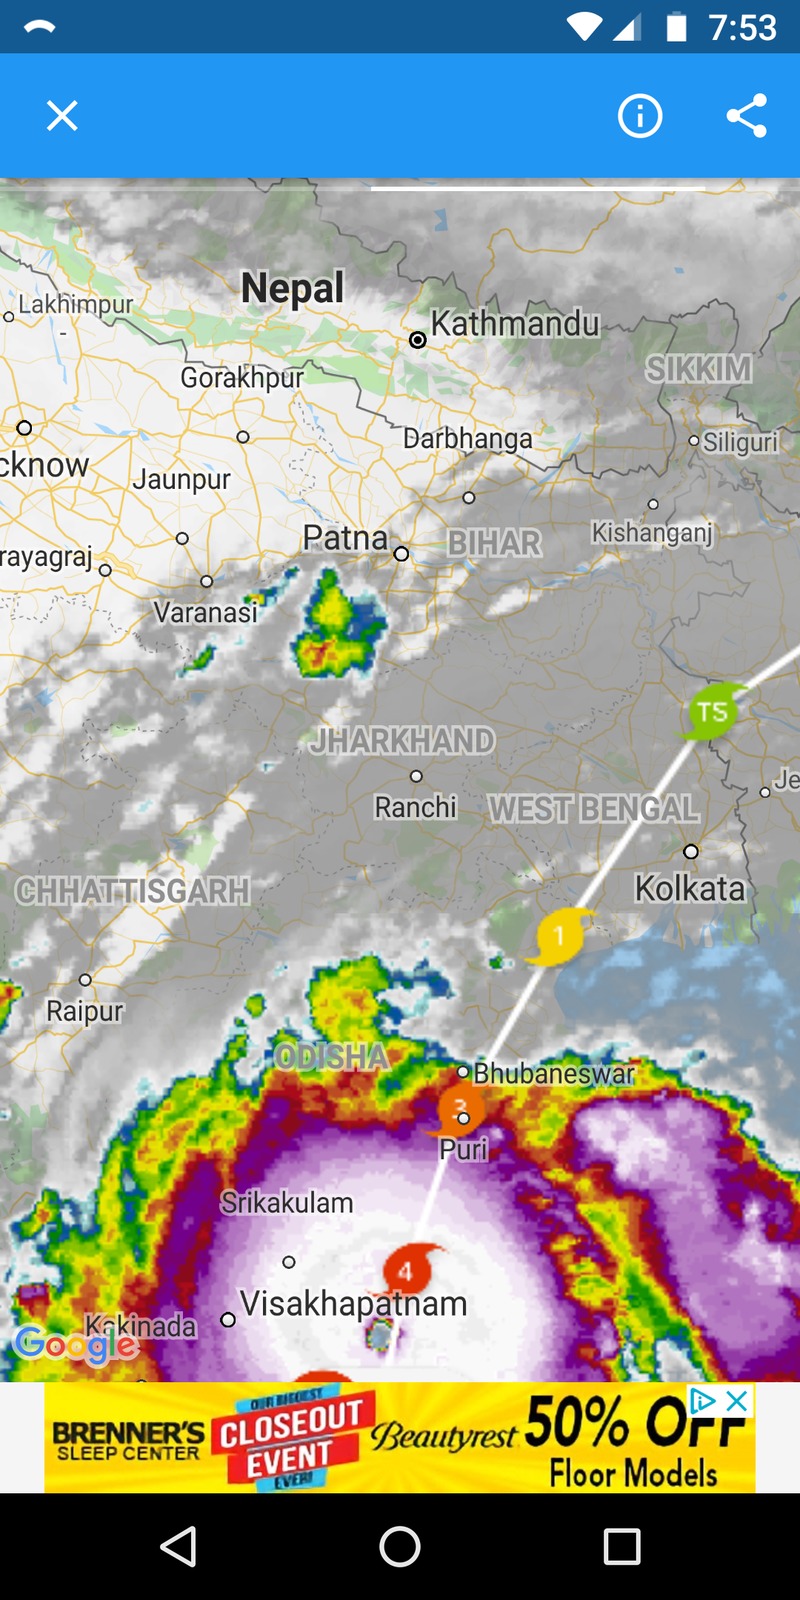 Storms in India are bearing down on our friend Shaun.